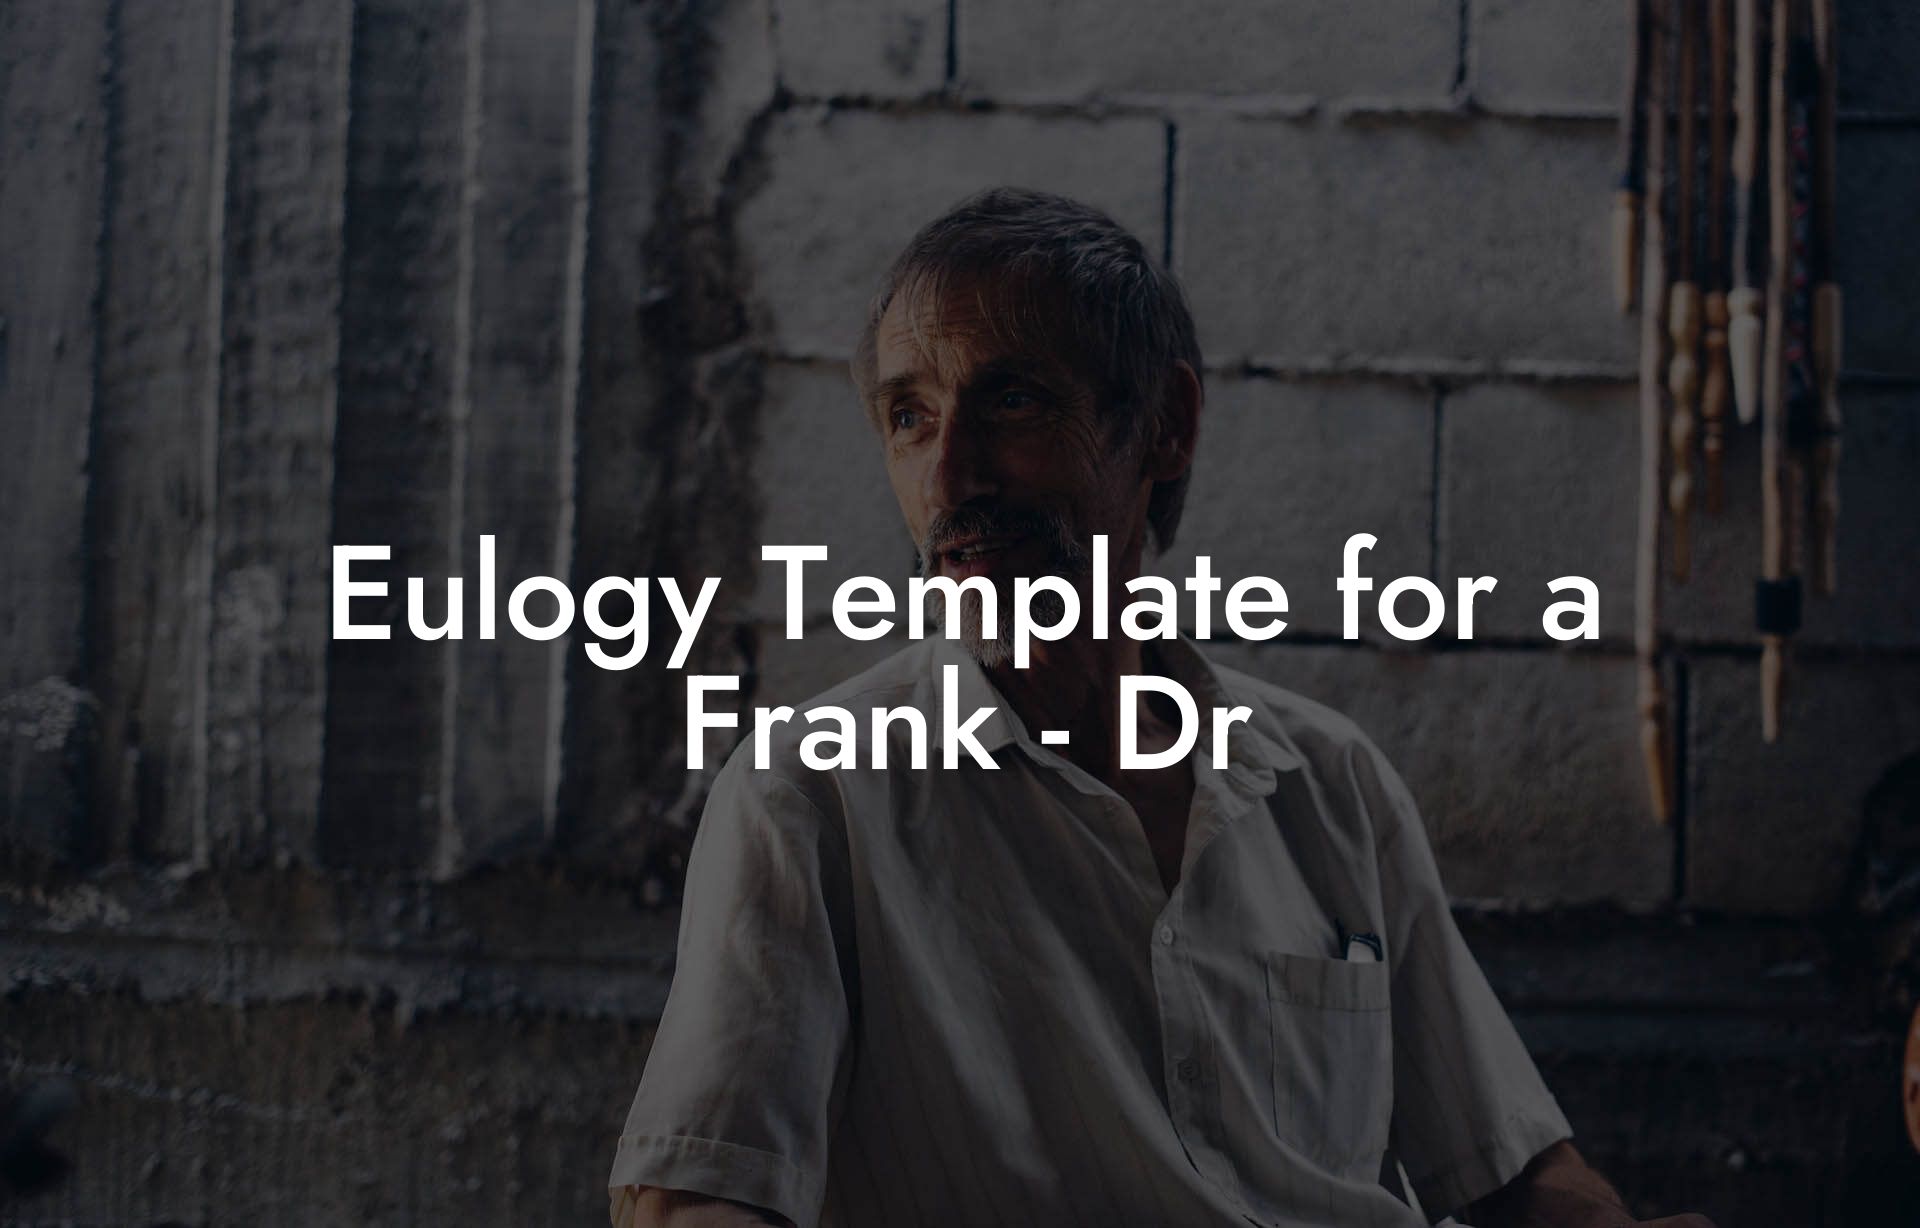 Eulogy Template for a Frank - Dr